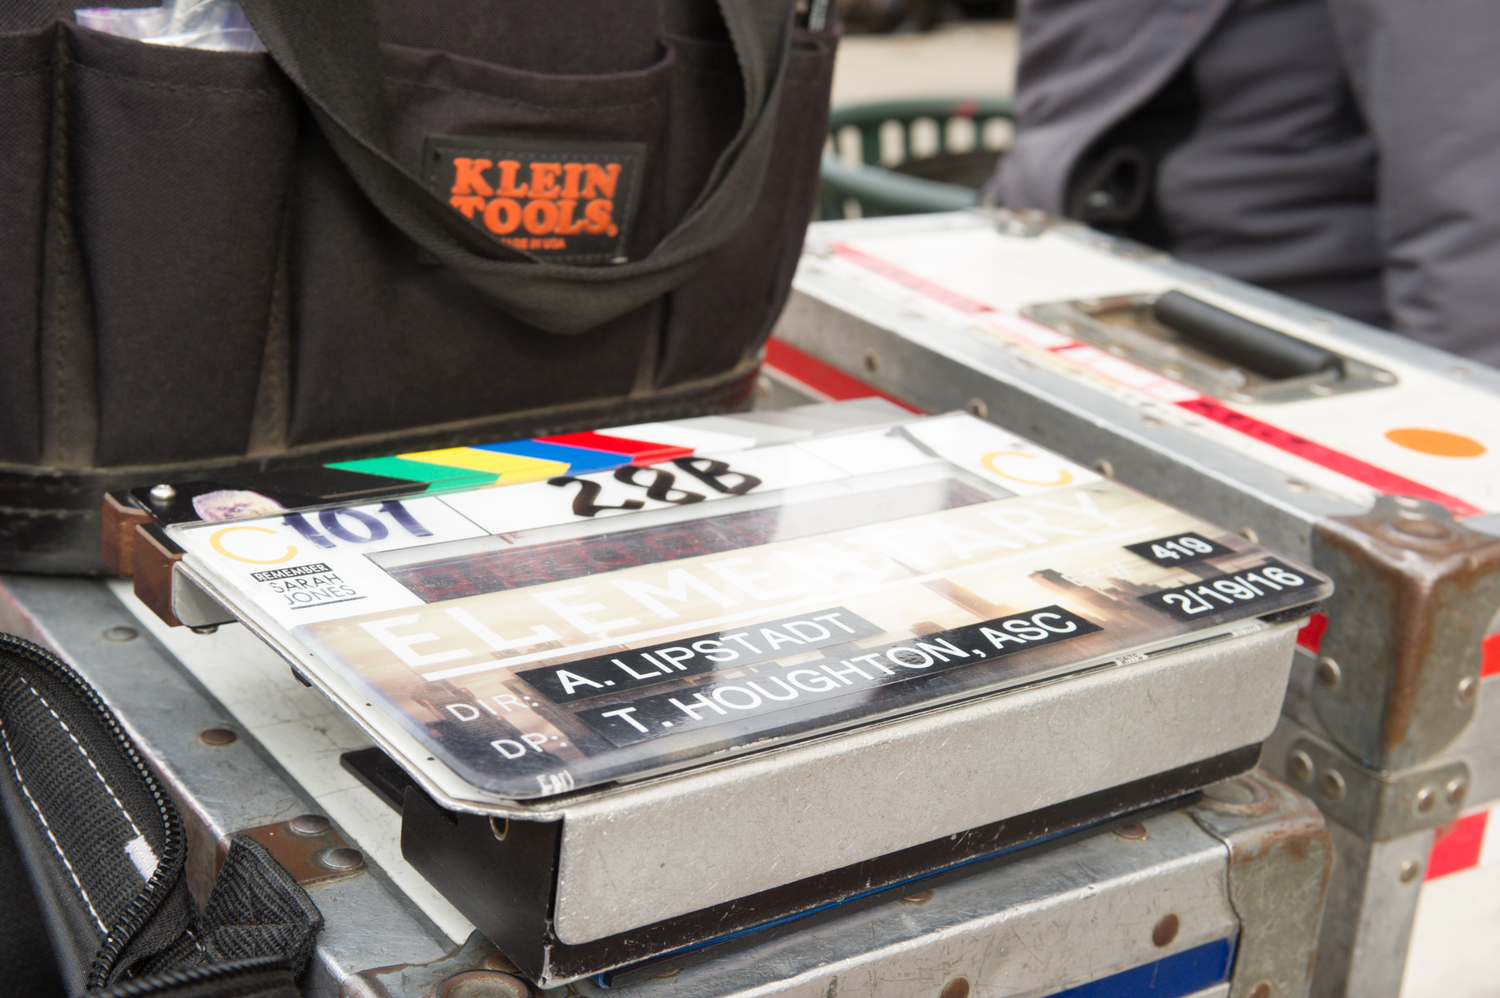 A clapboard listing the episode's director and director of photography